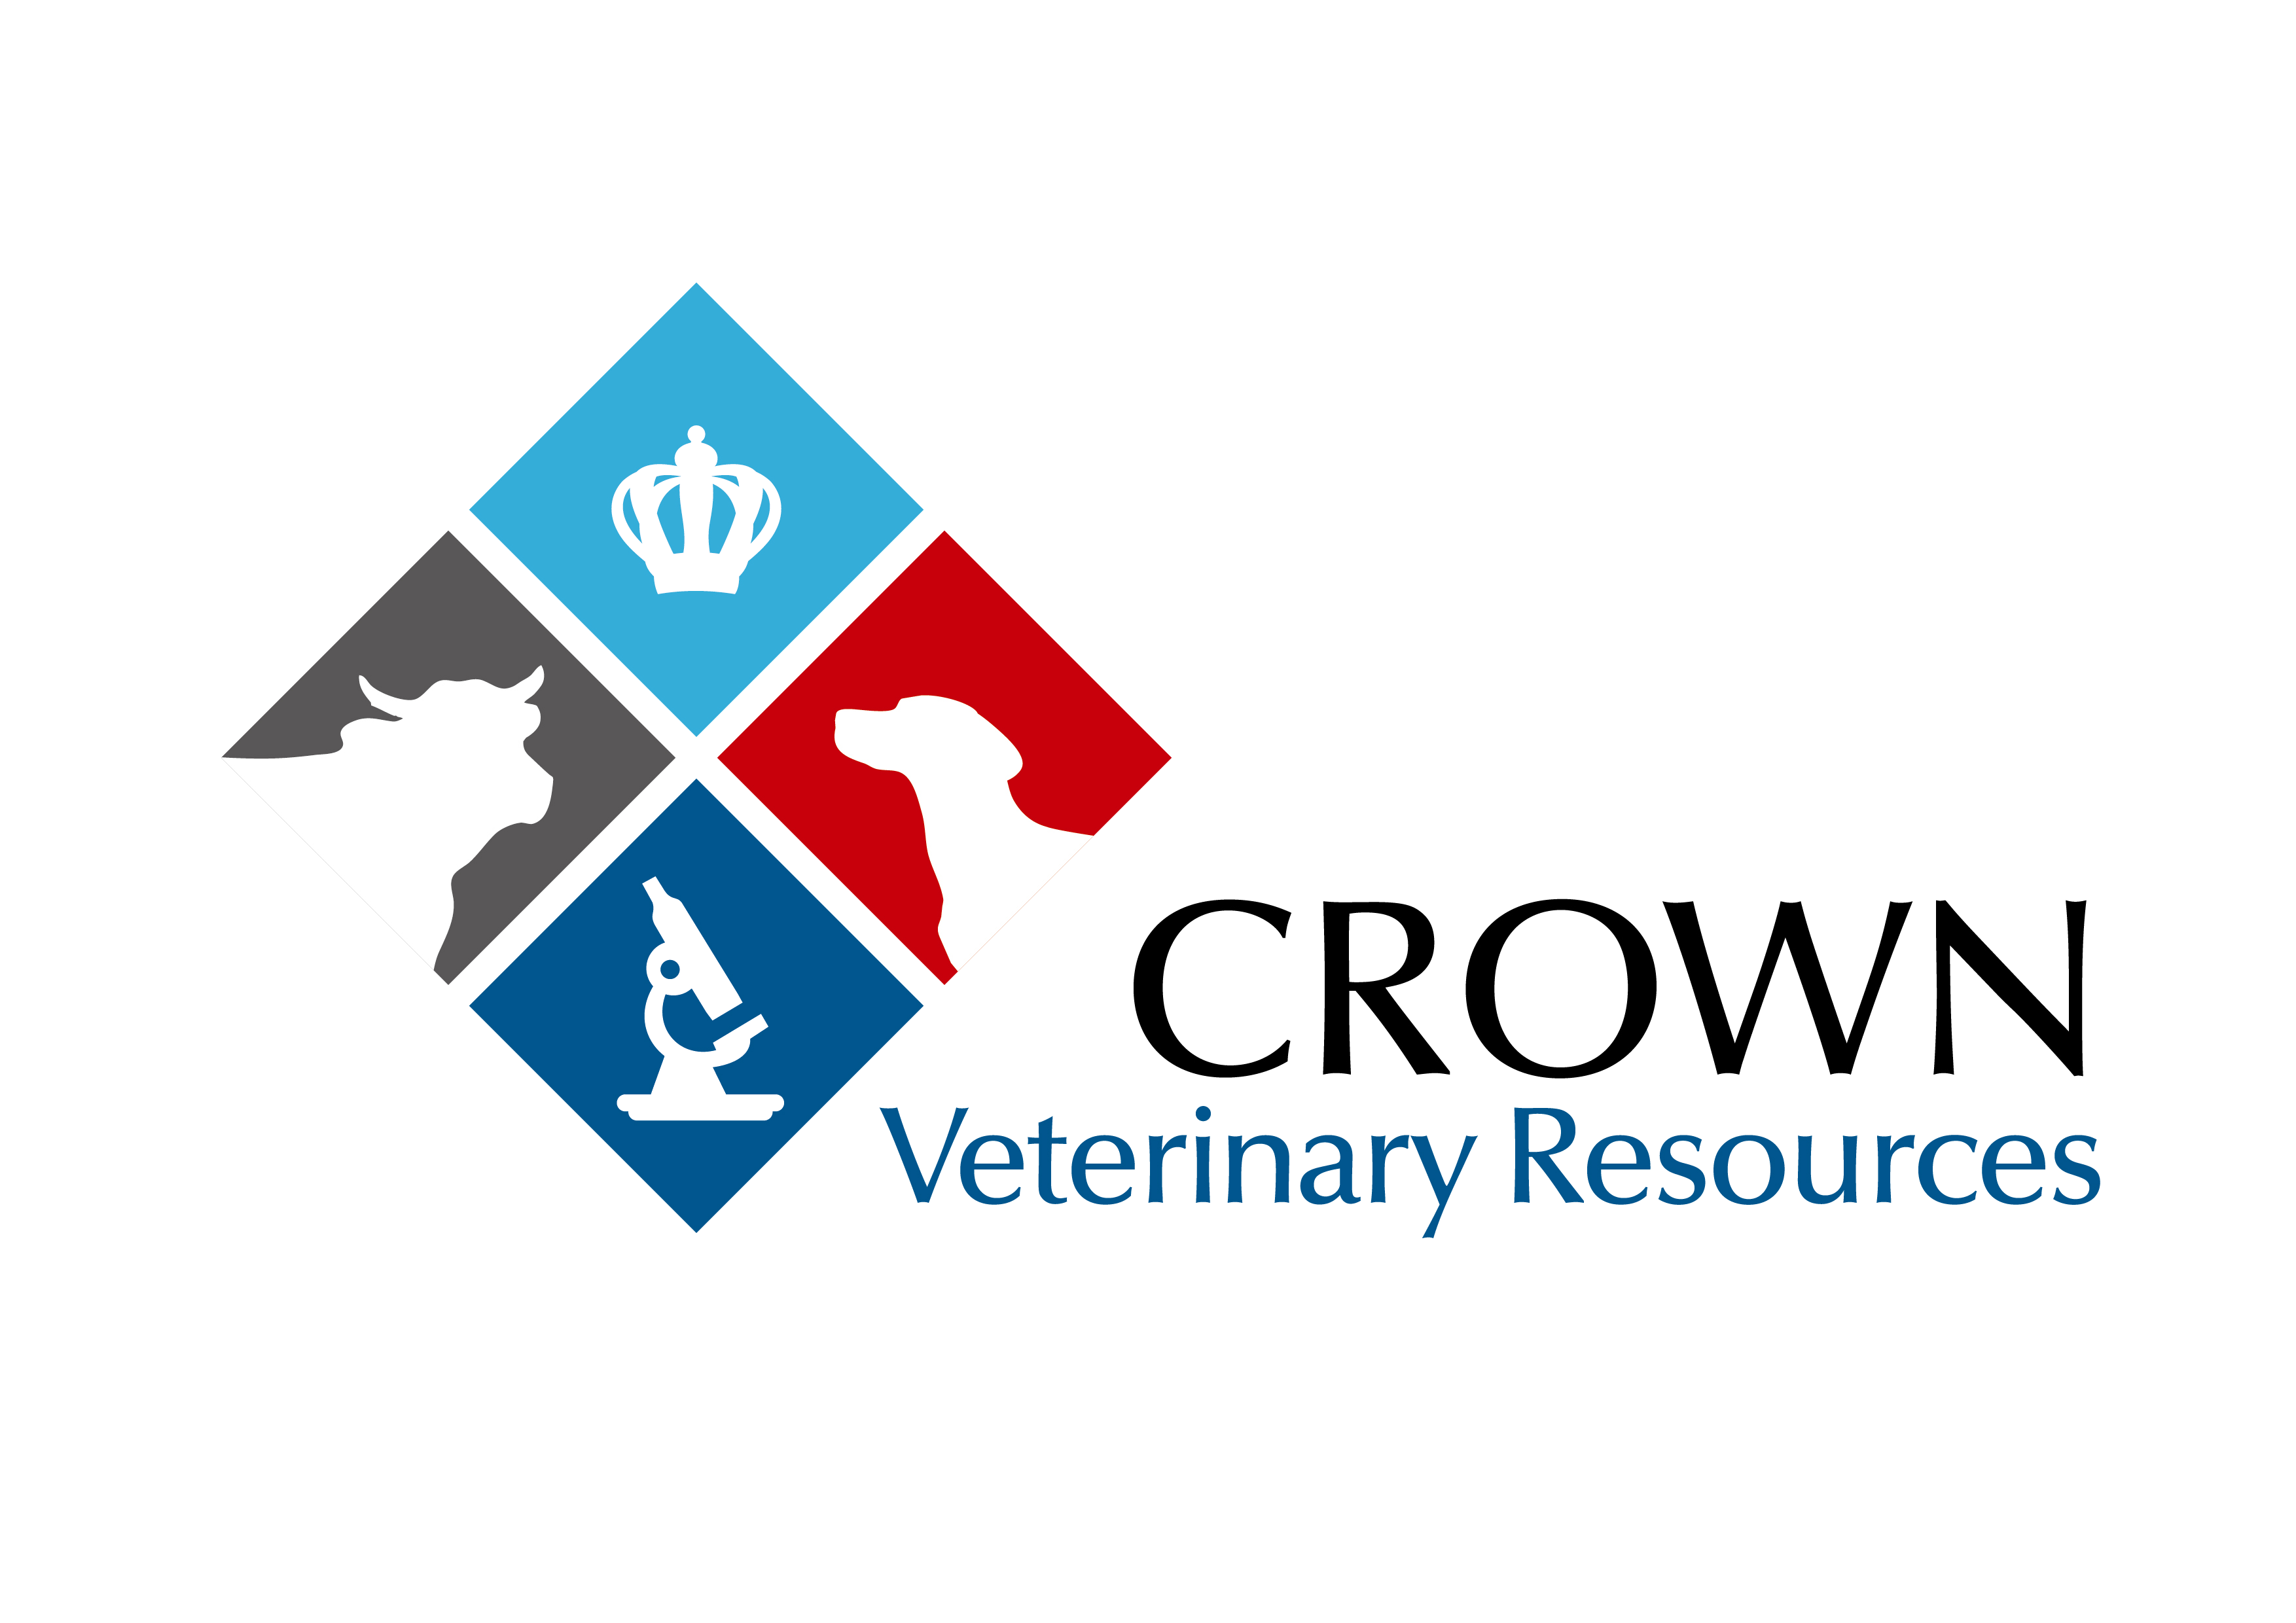 Crown Veterinary & Medical Resources